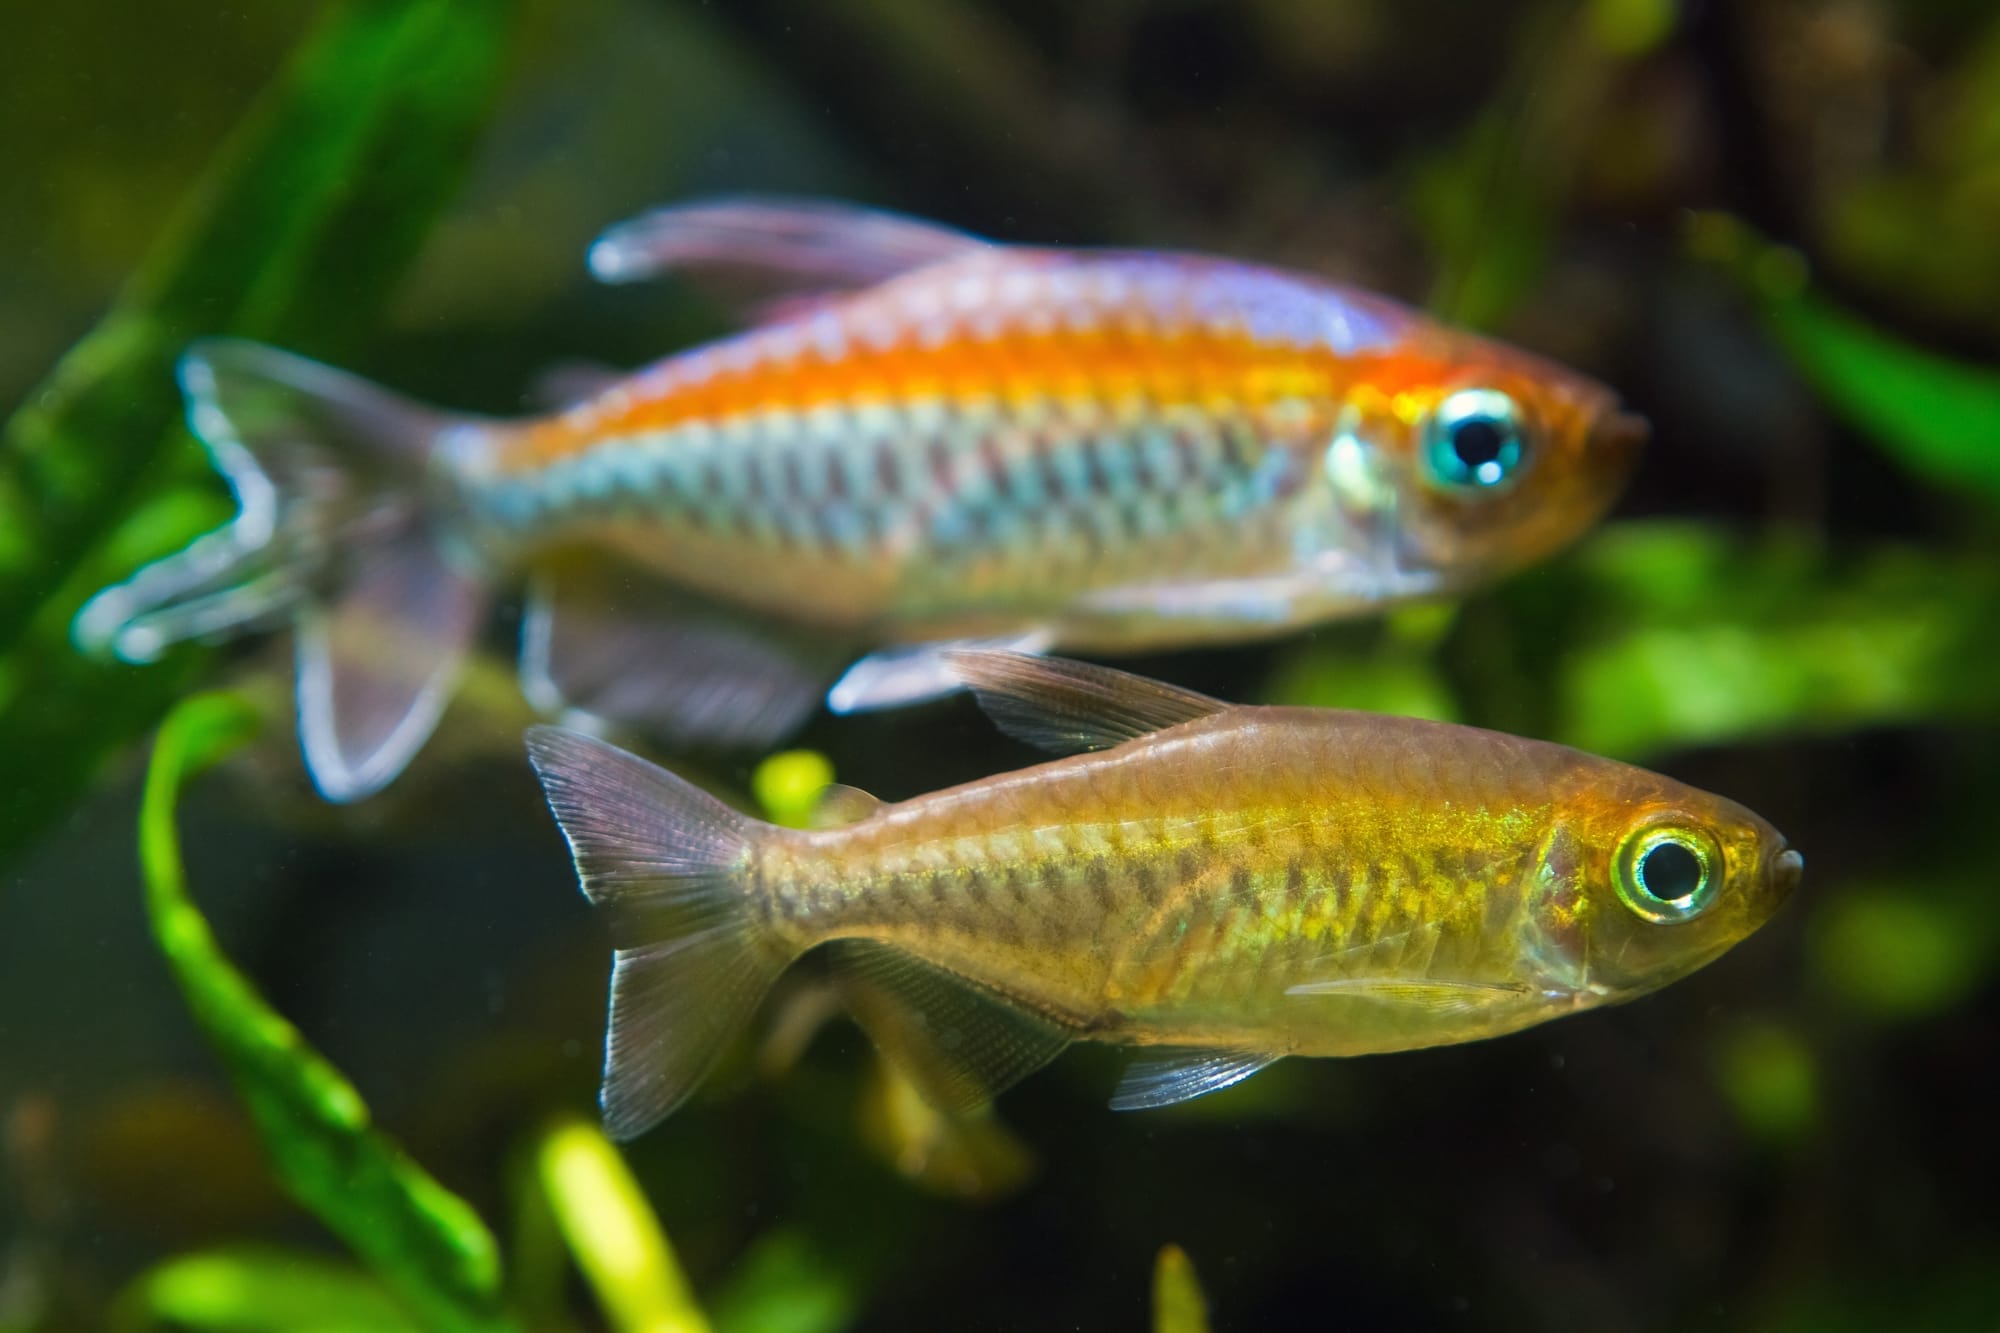 Congo Tetra: The Colorful Freshwater Fish